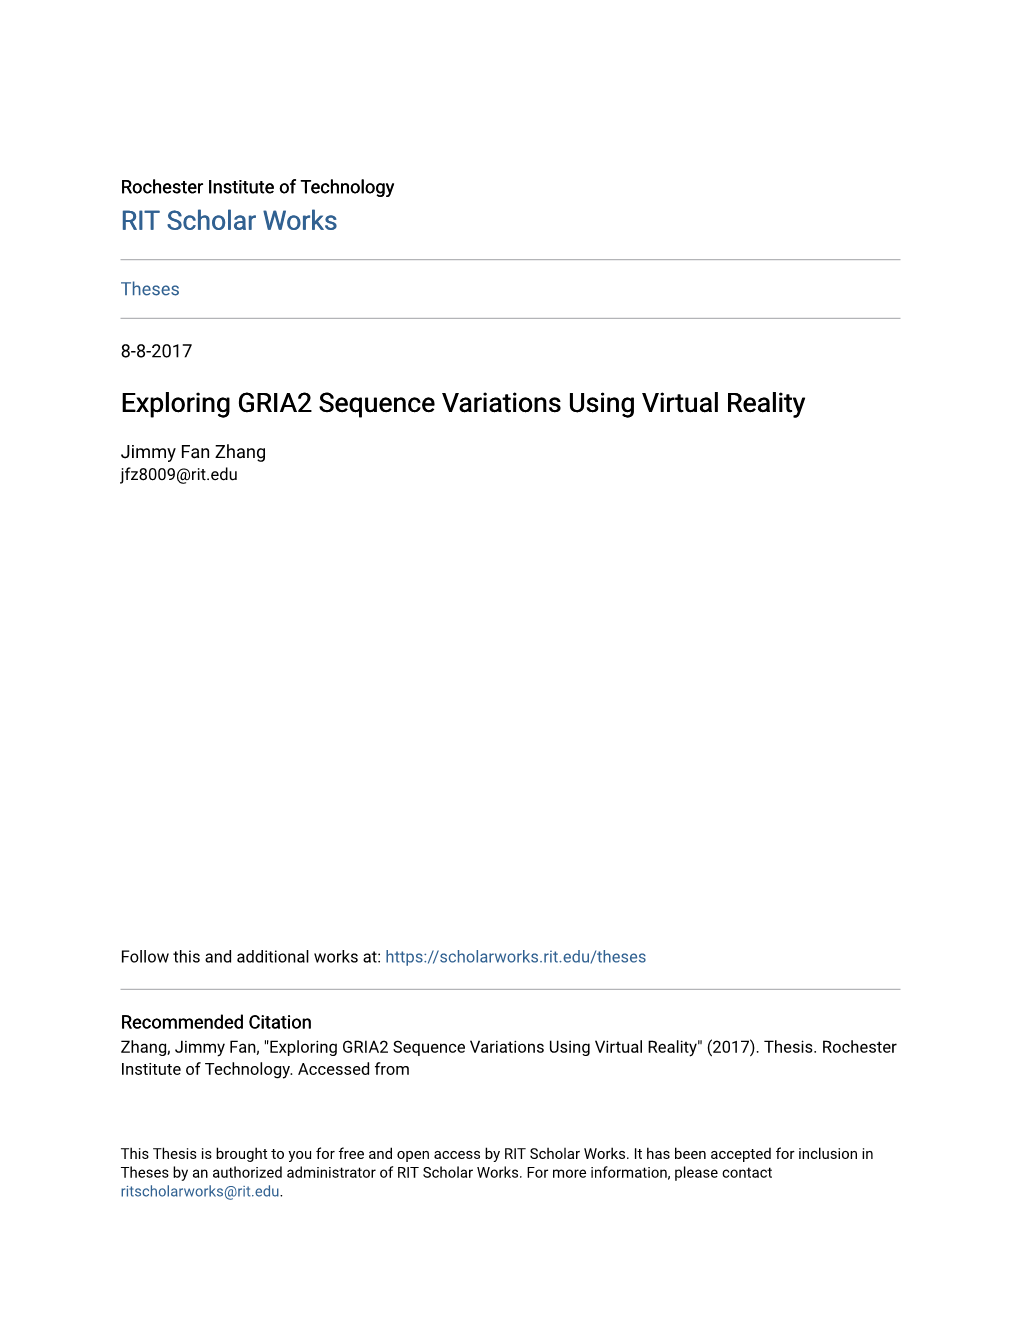 Exploring GRIA2 Sequence Variations Using Virtual Reality